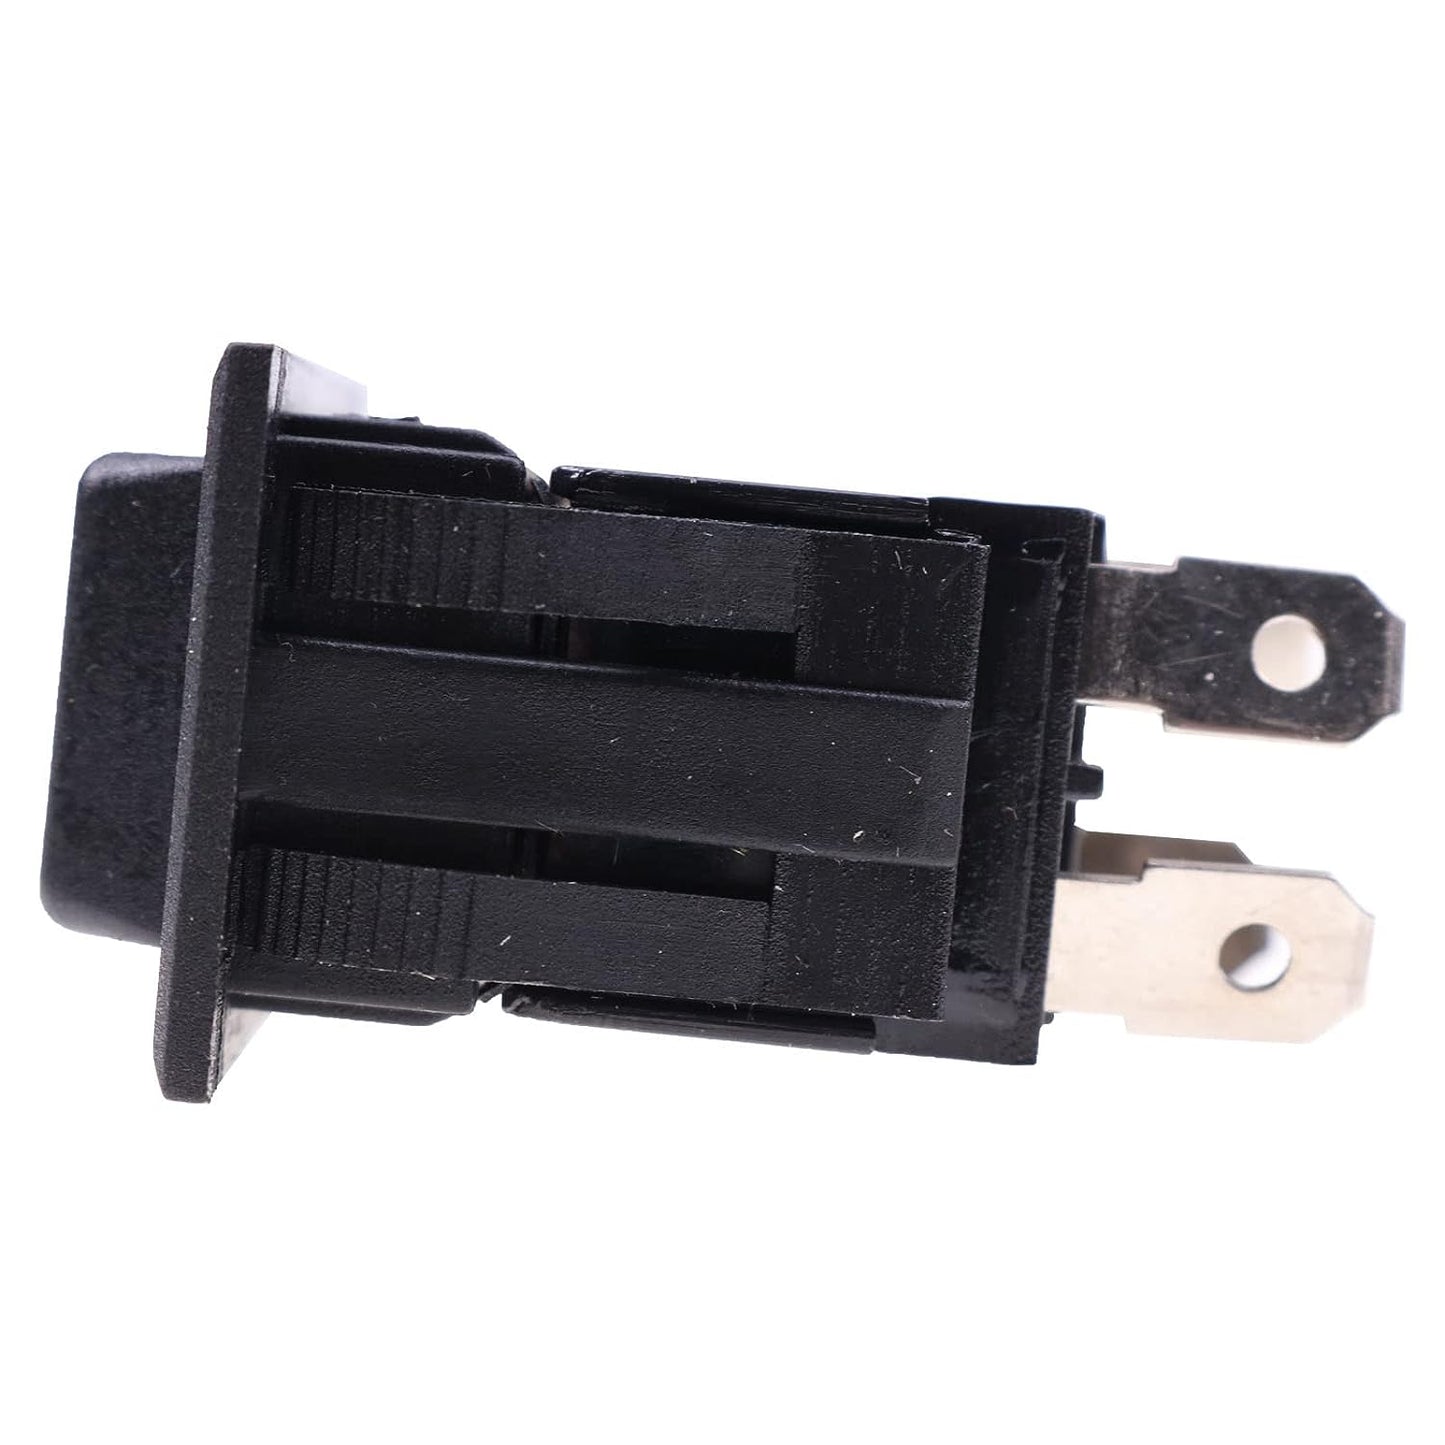 6665410 Headlight Switch Compatible With Bobcat Loaders 751 753 763 773 863 864 873